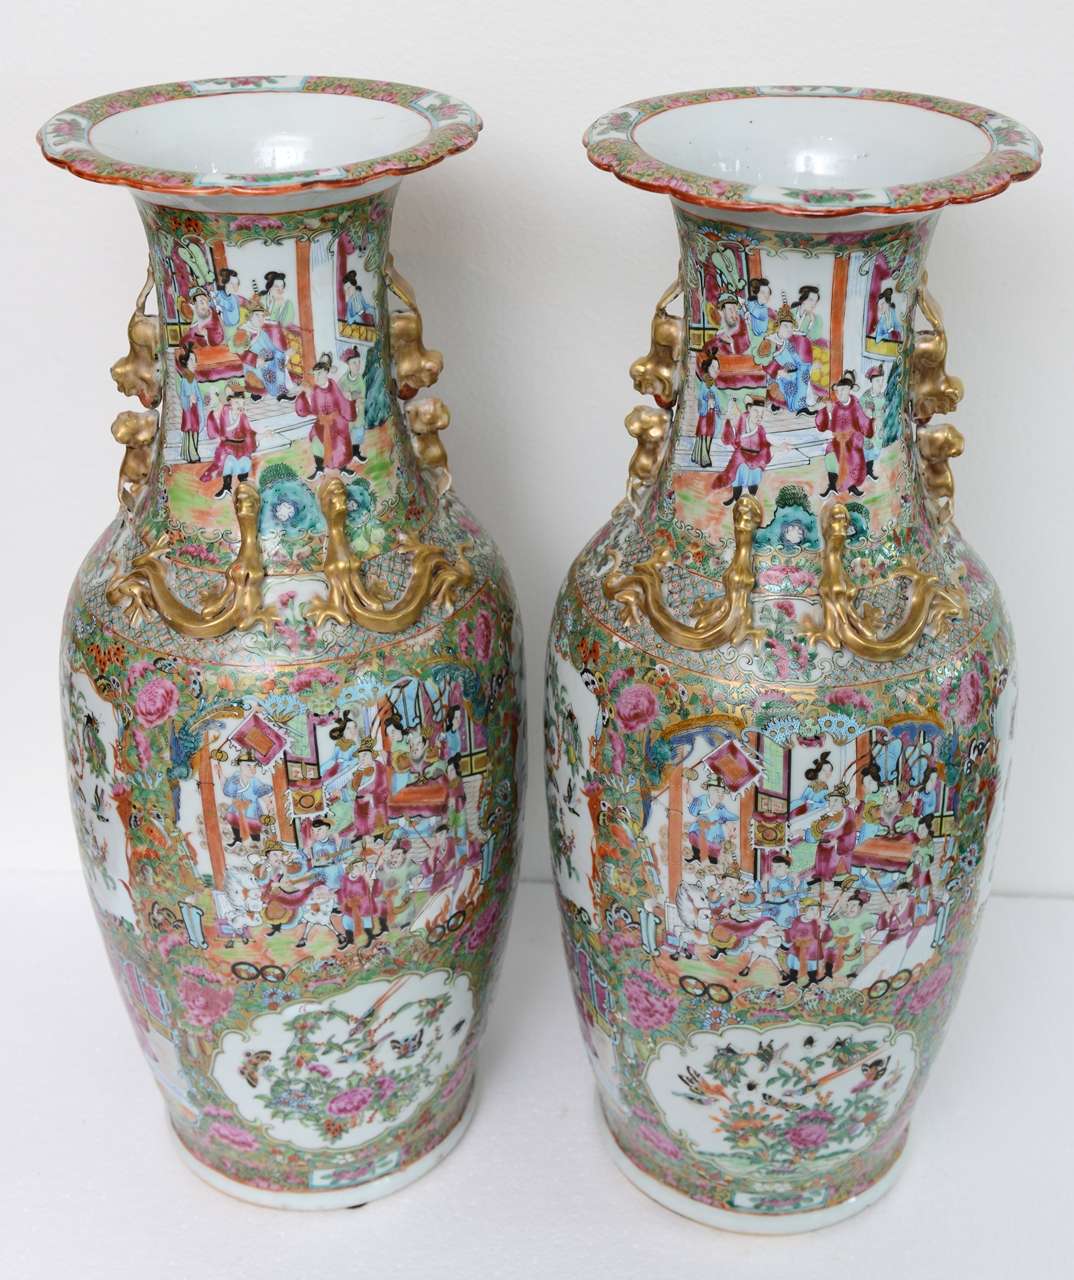 PAIR CHINESE PORCELAIN FAMILLE ROSE VASES

Originally $ 12,000.00

Famille rose (known in Chinese as Fencai (粉彩) or Ruancai (軟彩, simplified 软彩), meaning 'soft colours', and later as Yangcai (洋彩), meaning 'foreign colours') was introduced during